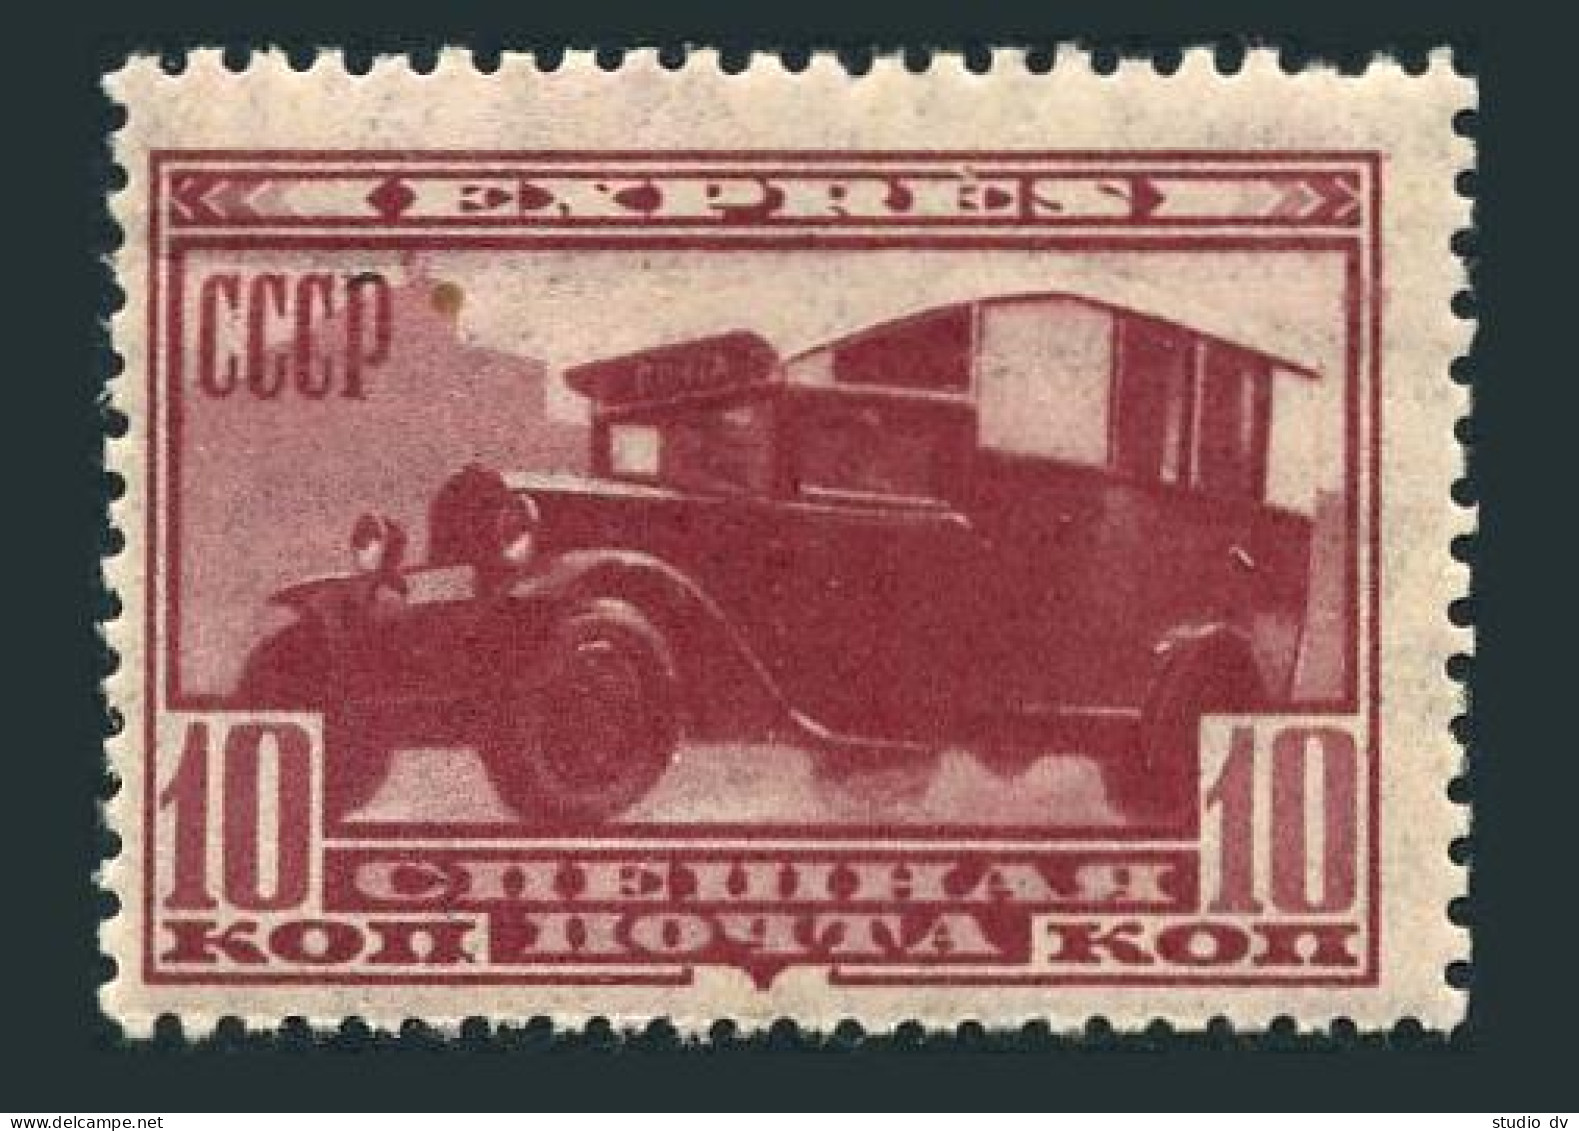 Russia E2,lightly Hinged,.Michel 408. Special Delivery,1932.Express Truck. - Ungebraucht